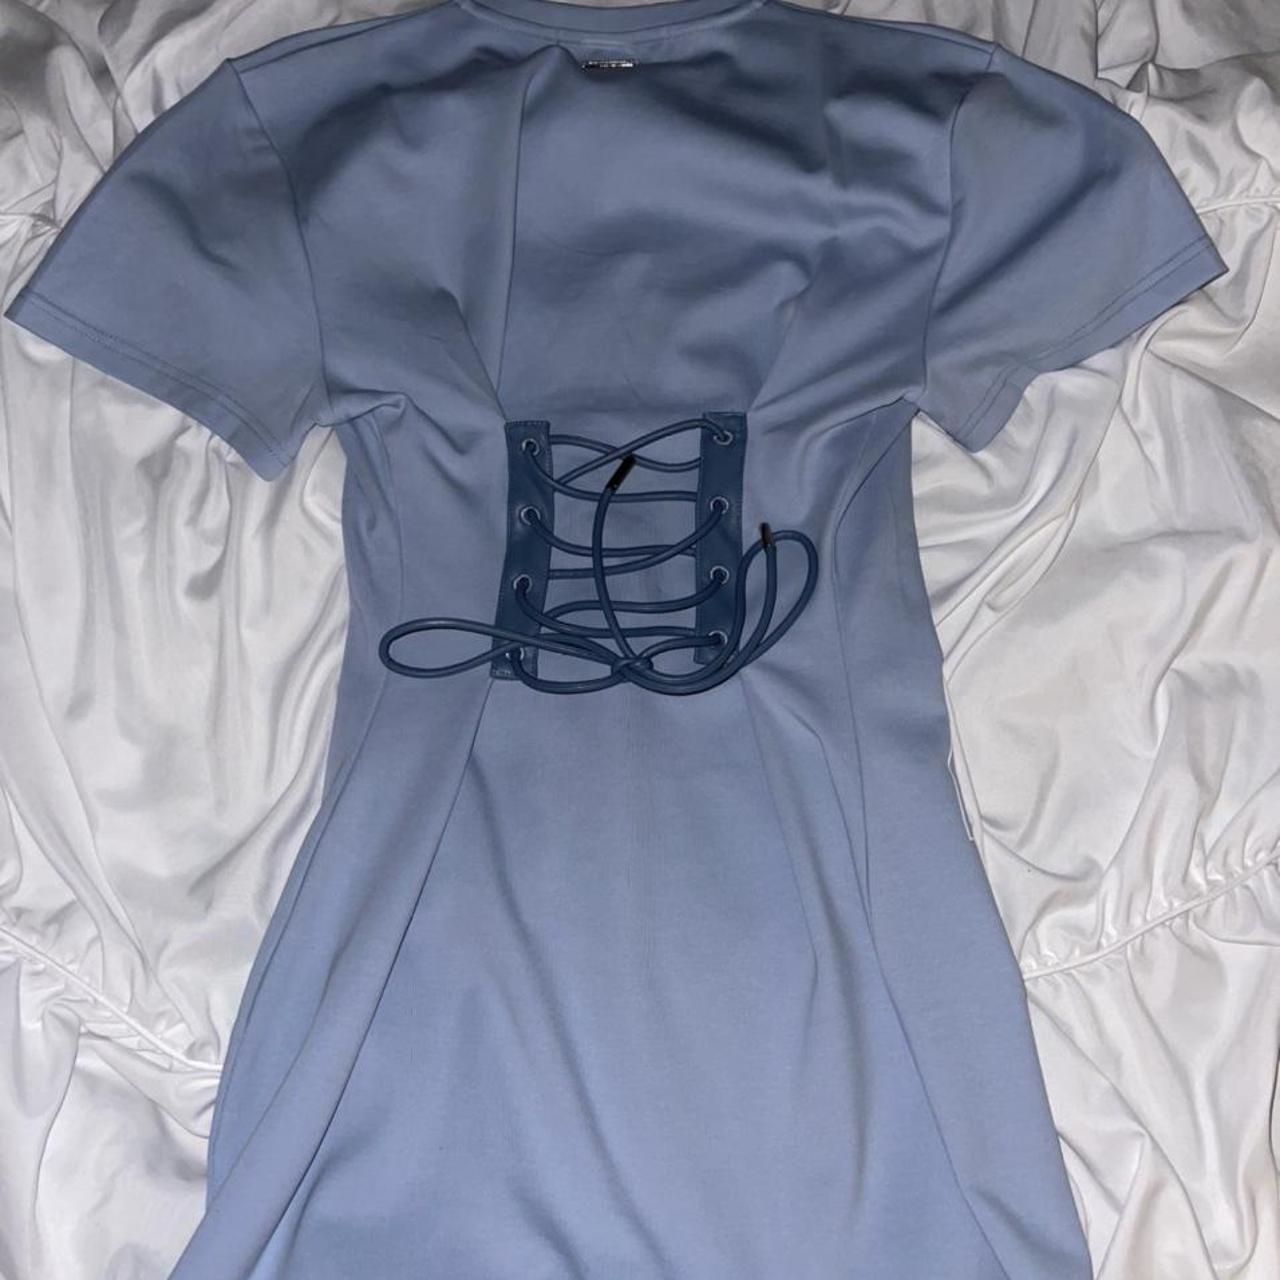 Women's Blue and White Dress (3)